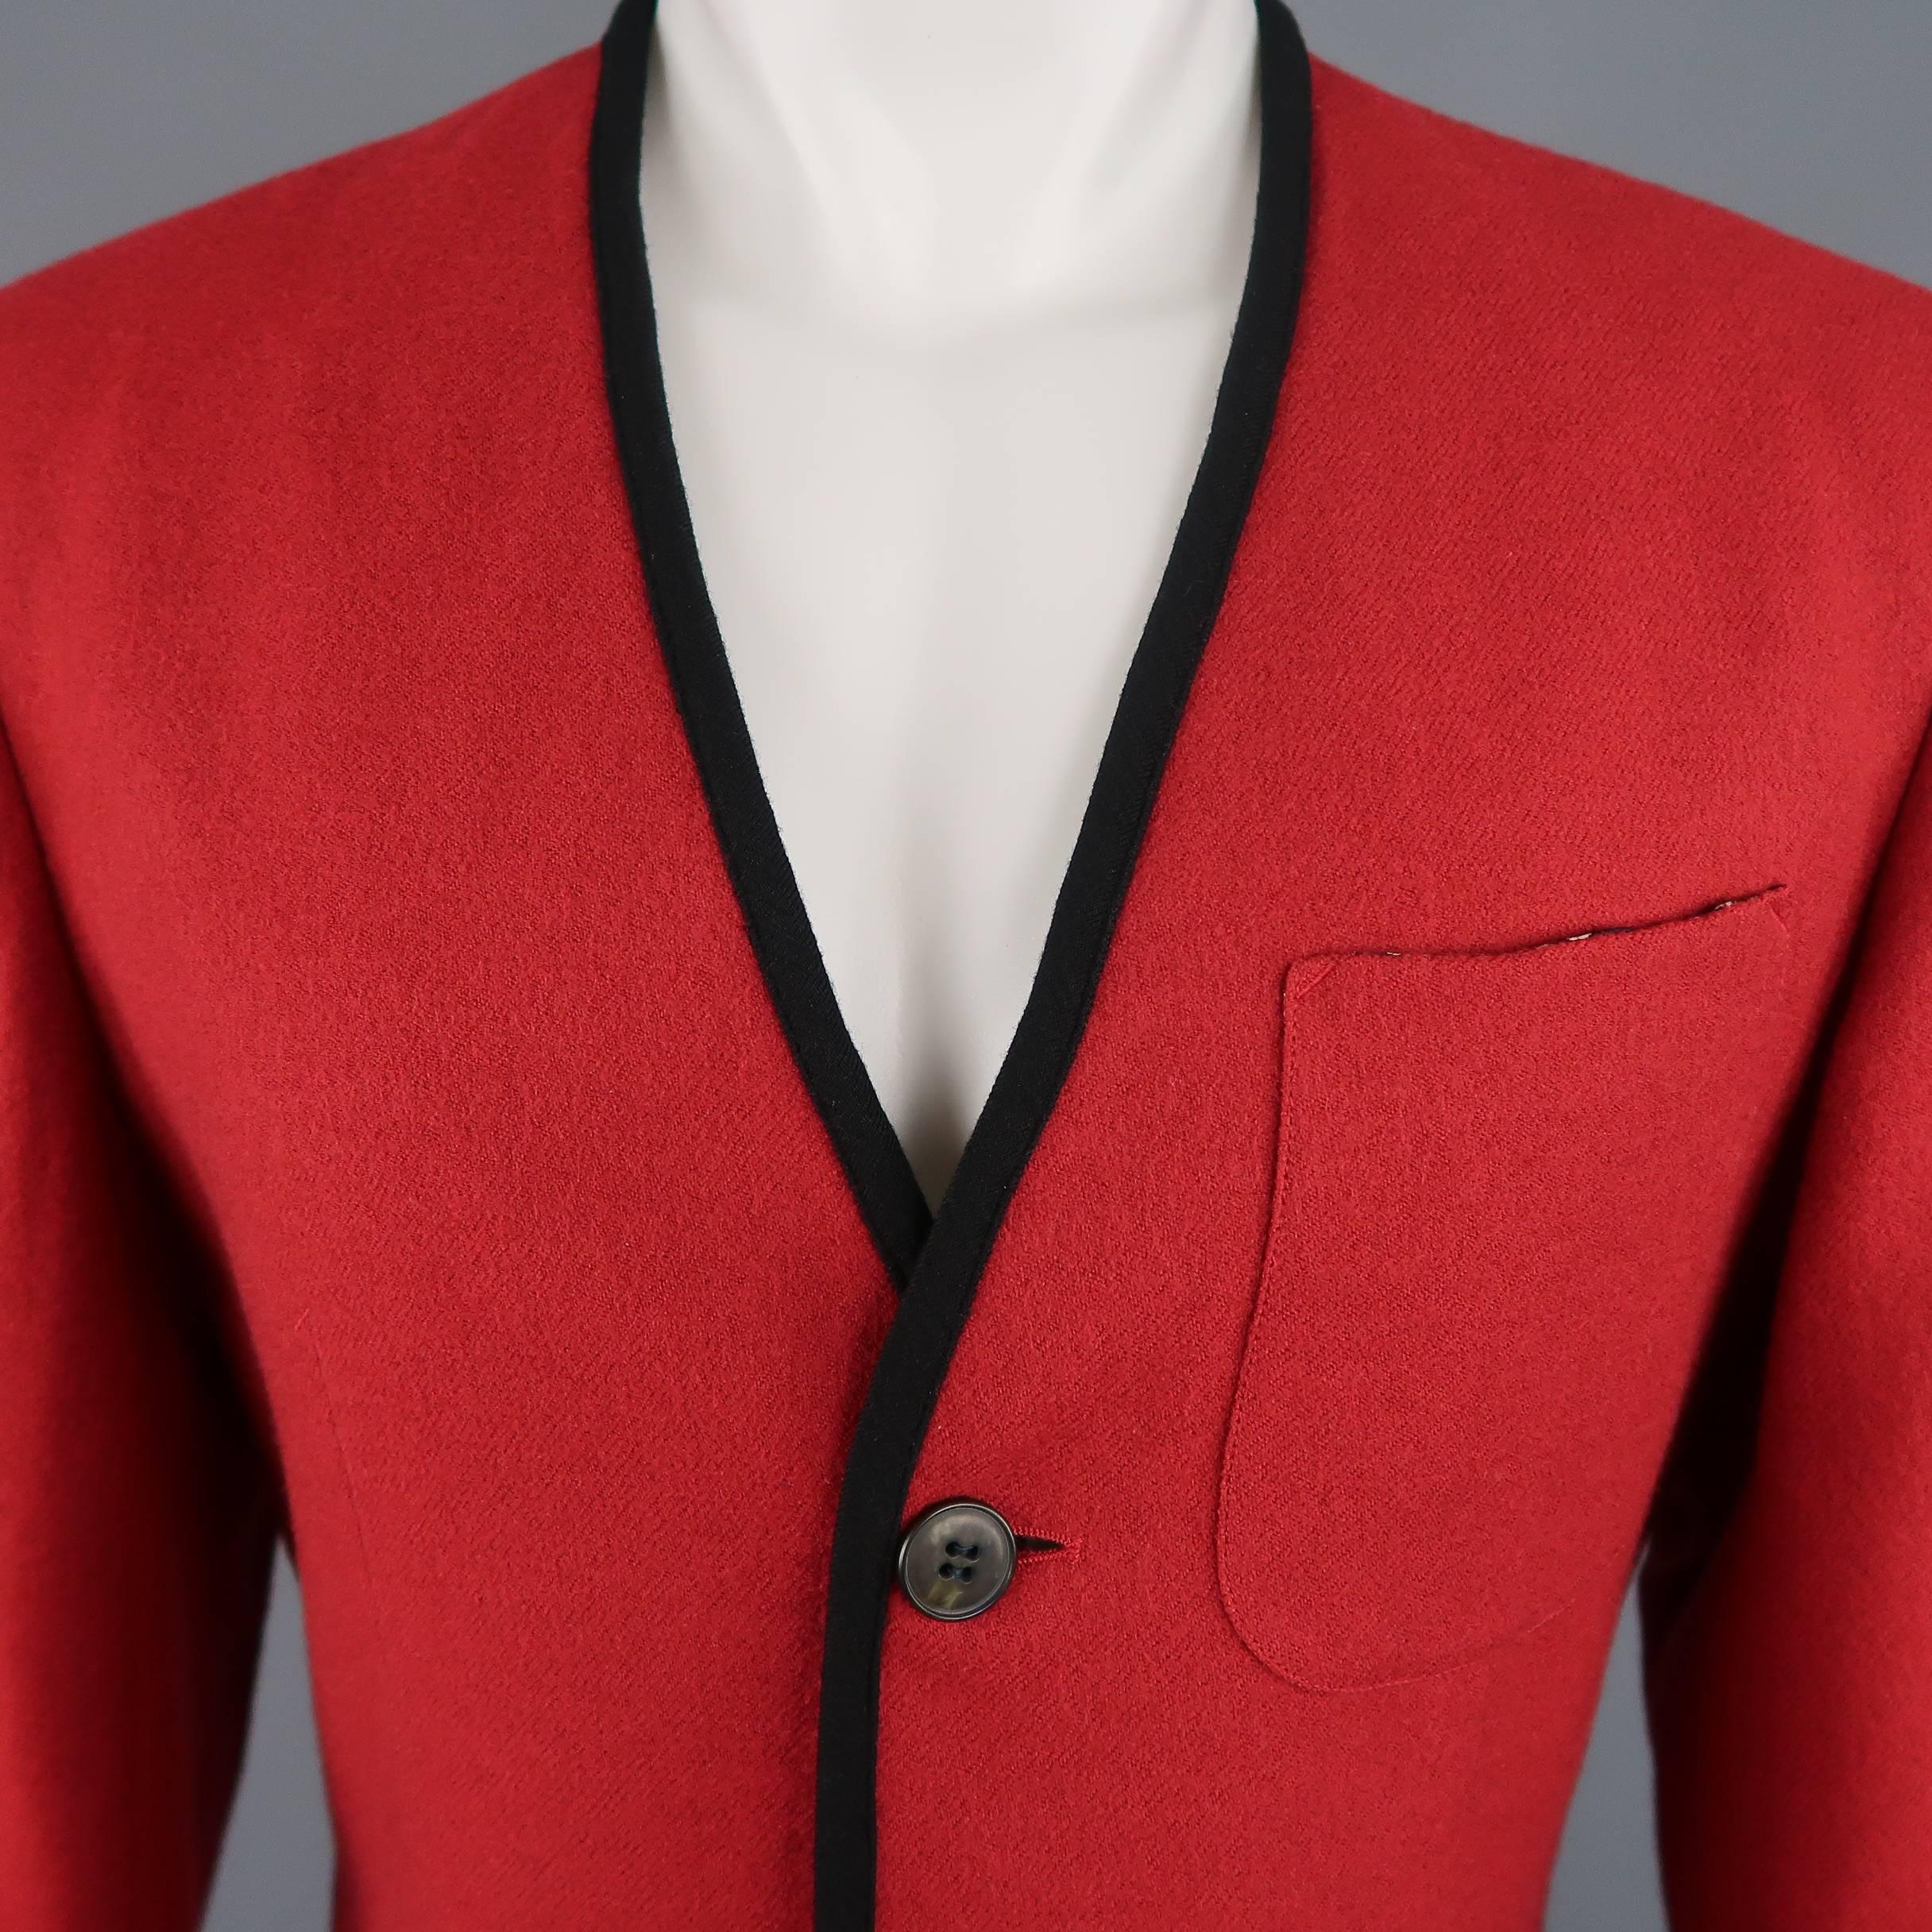 Vintage Jean Paul Gaultier Homme jacket comes in dark red wool with a collarless V neckline, black piping, patch pockets, back tab, and printed liner. Made in Italy.
 
Excellent Pre-Owned Condition.
Marked: IT 48
 
Measurements:
 
Shoulder: 18